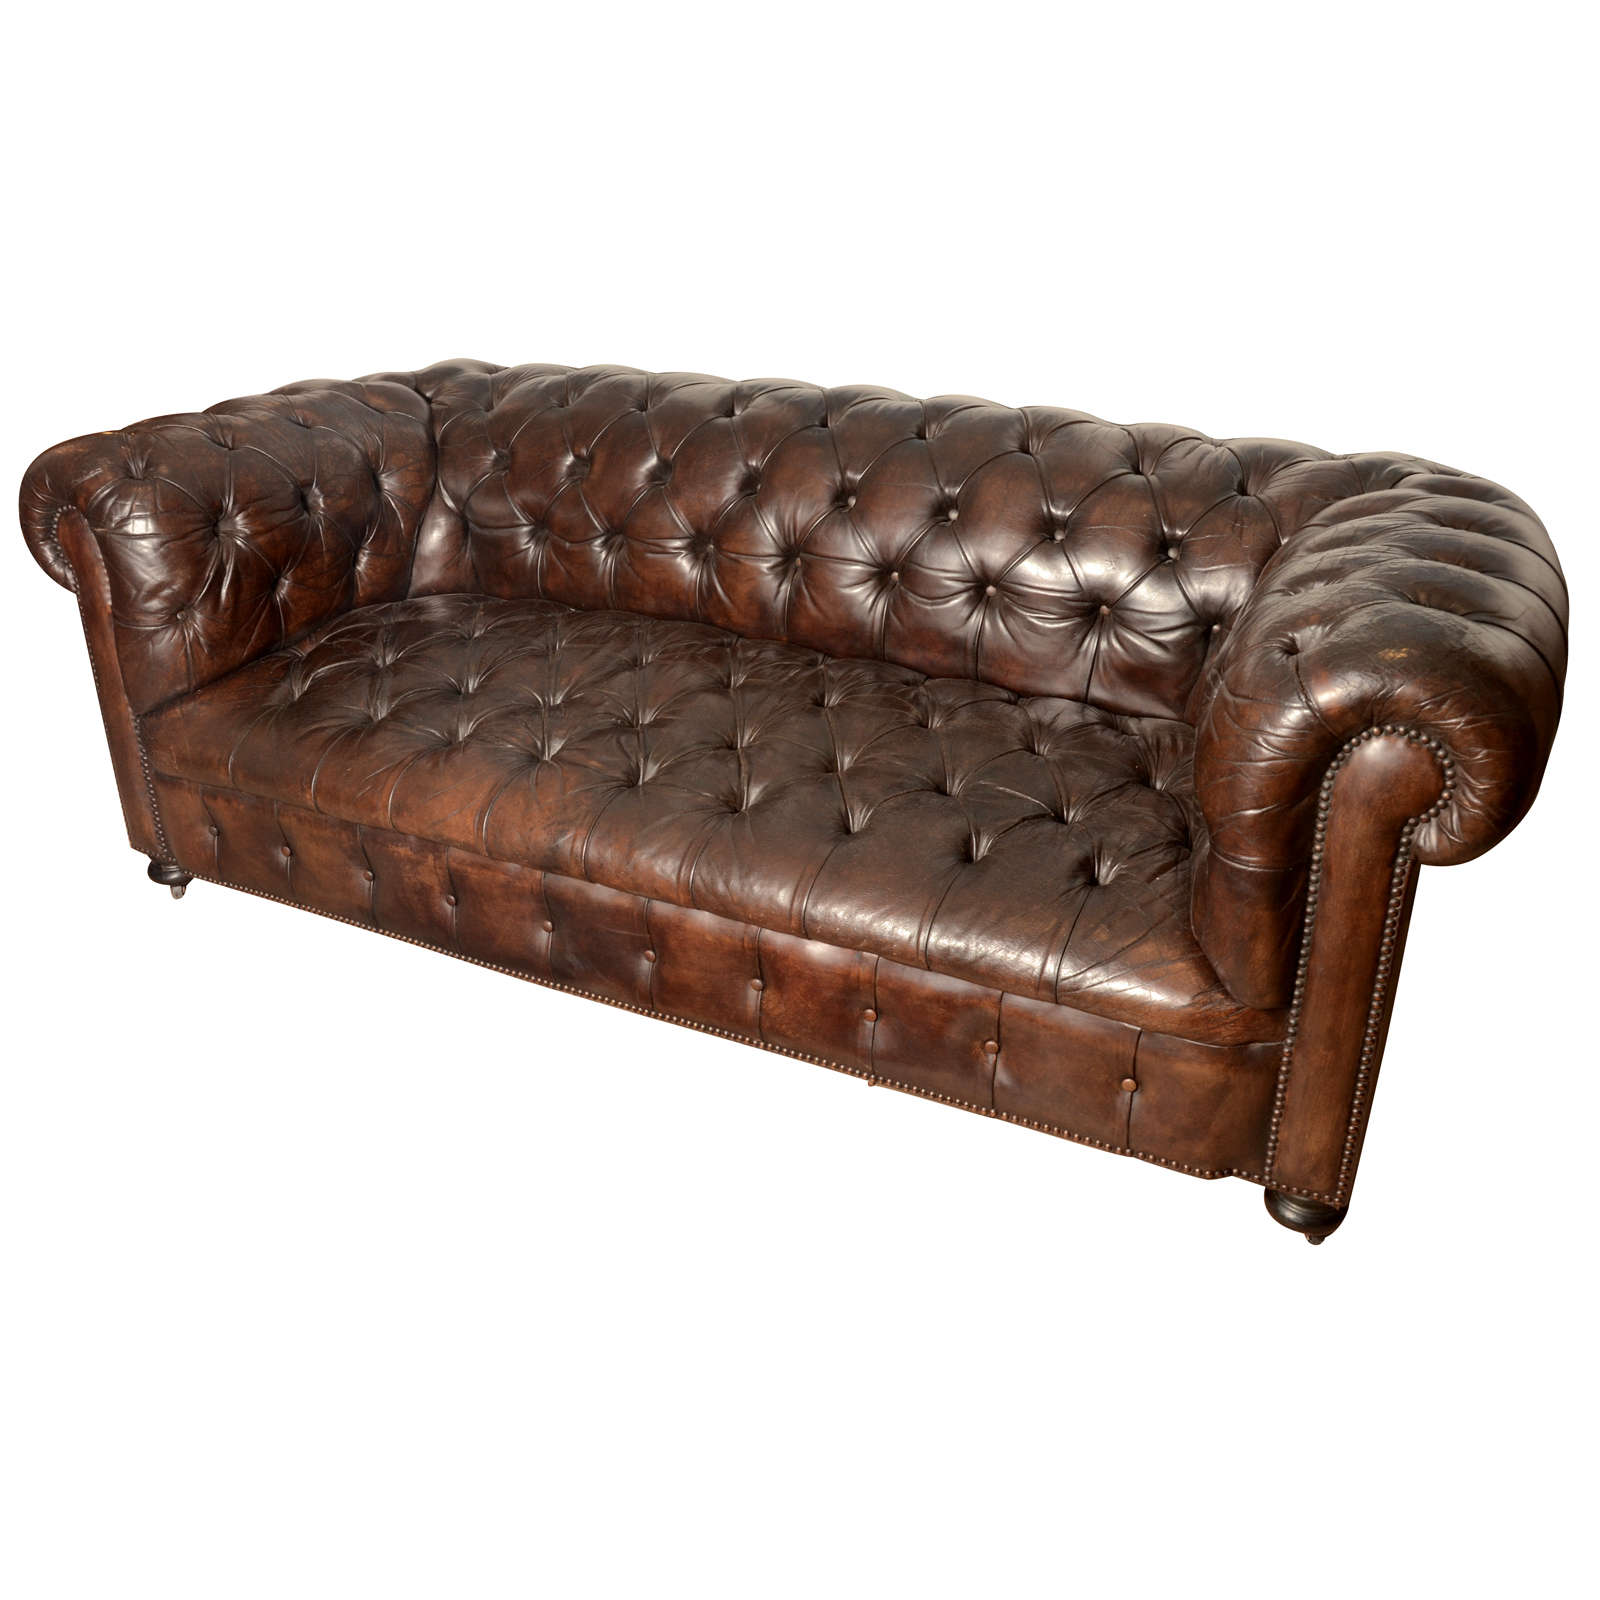 French Mid Century Chesterfield Sofa In Dark Brown For Sale At 1stdibs